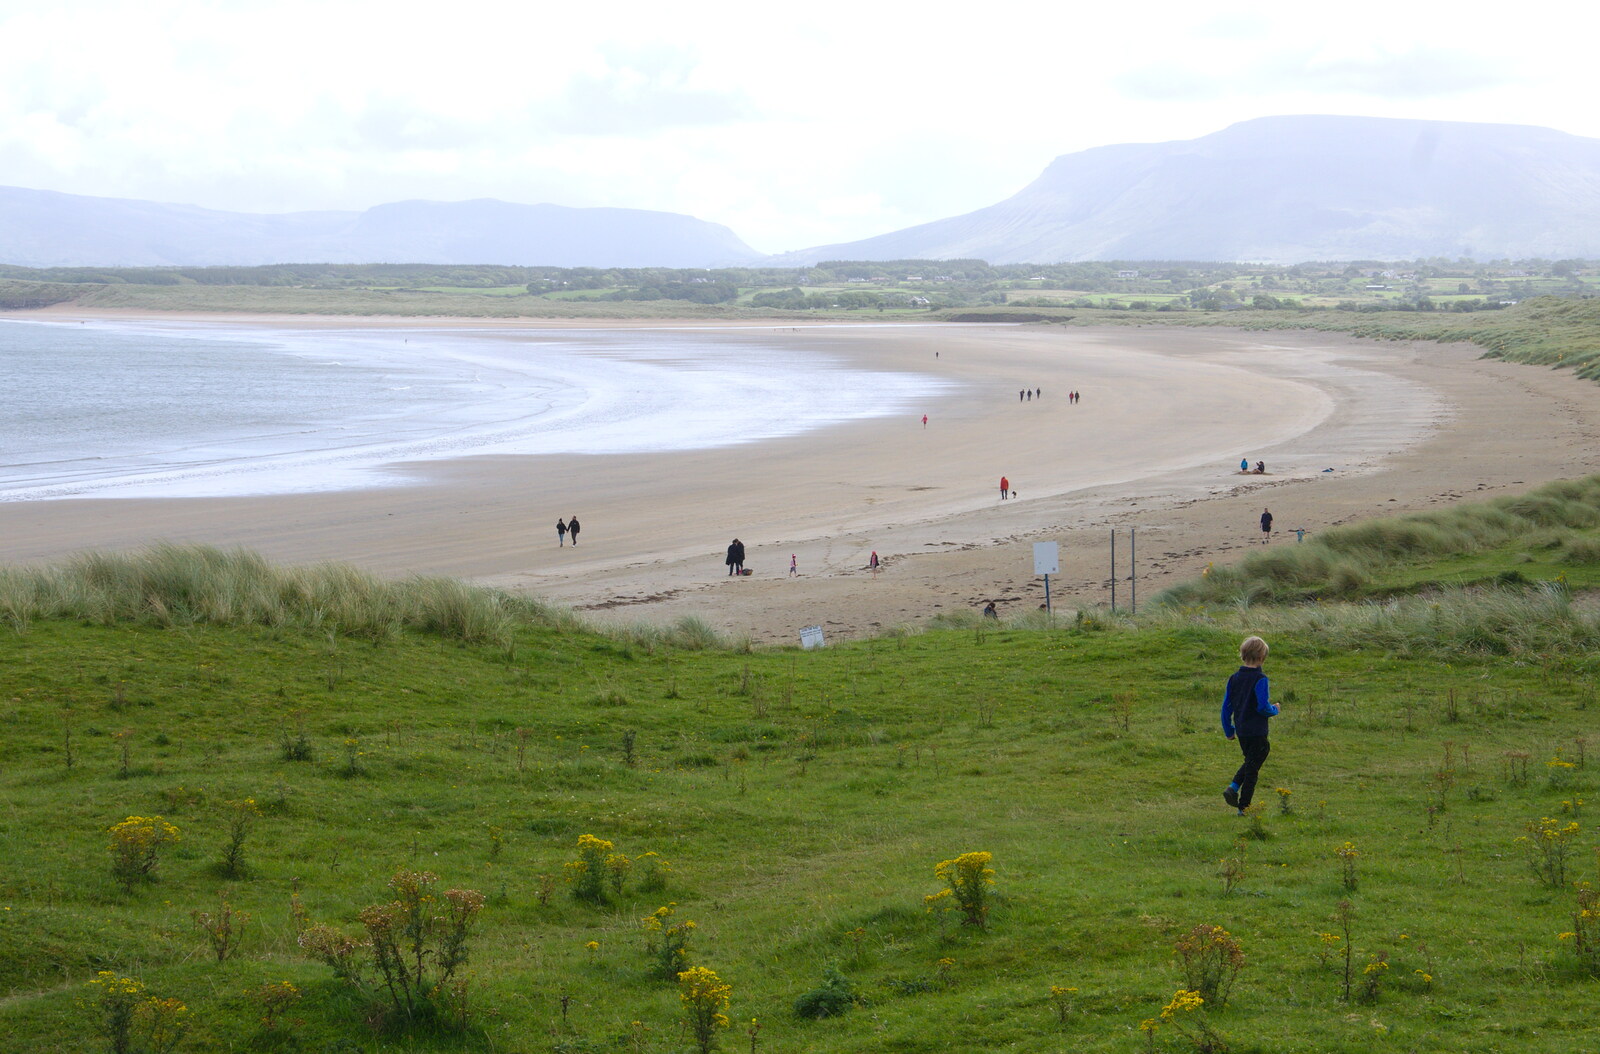 The wide expanse of beach at Mullaghmore from Mullaghmore Beach and Marble Arch Caves, Sligo and Fermanagh, Ireland - 19th August 2019